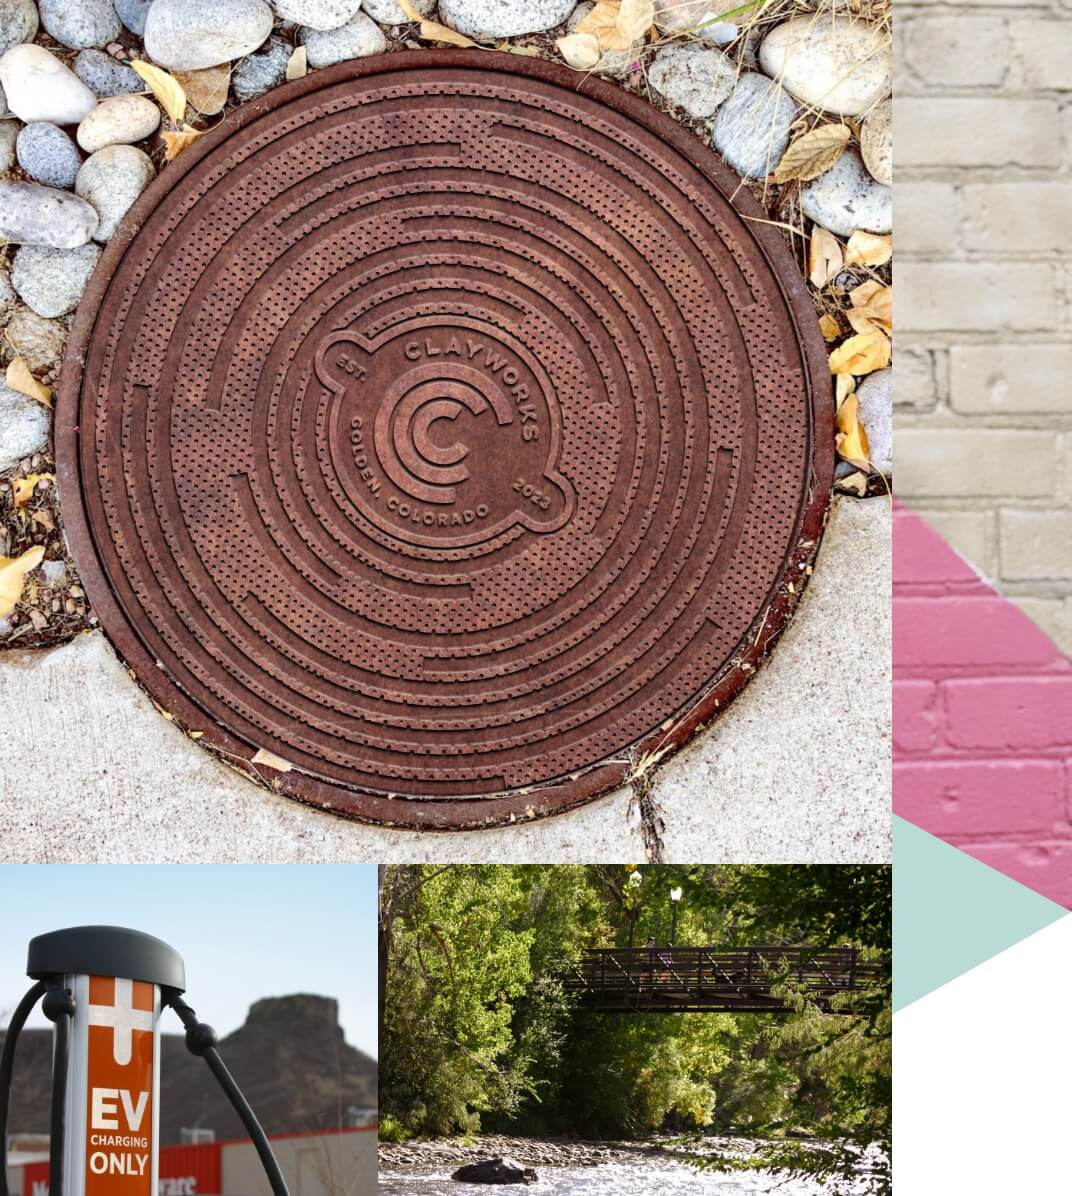 A collage of images including a manhole cover with the Clayworks logo, an electric vehicle charging station and a bridge crossing over Clear Creek.